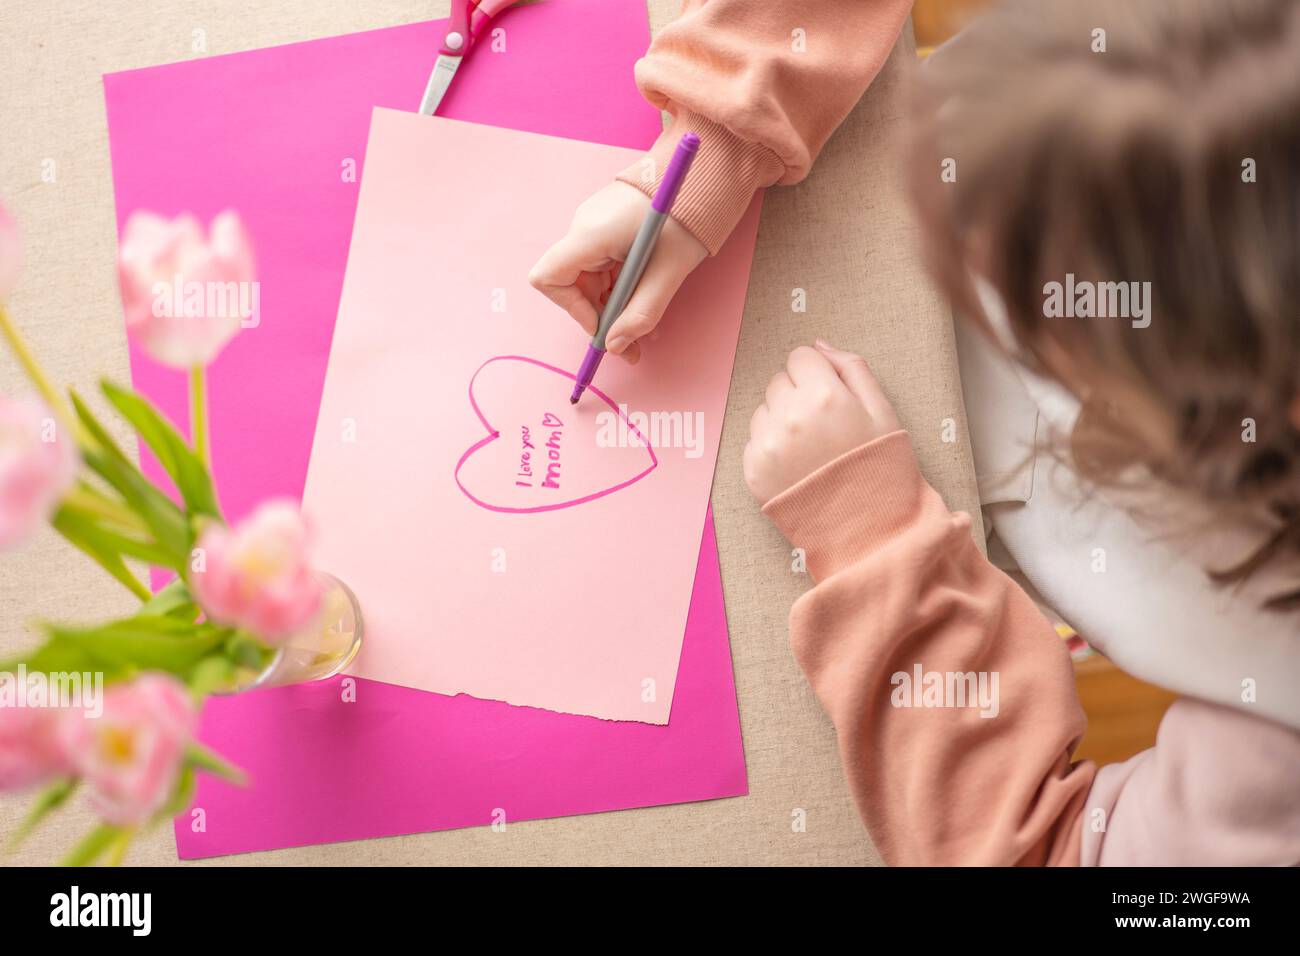 Mothers Day.Flowers and cards for mom.Daughter draws a card for mom.Message to mom.Child draws a heart and writes mom I love you. Stock Photo